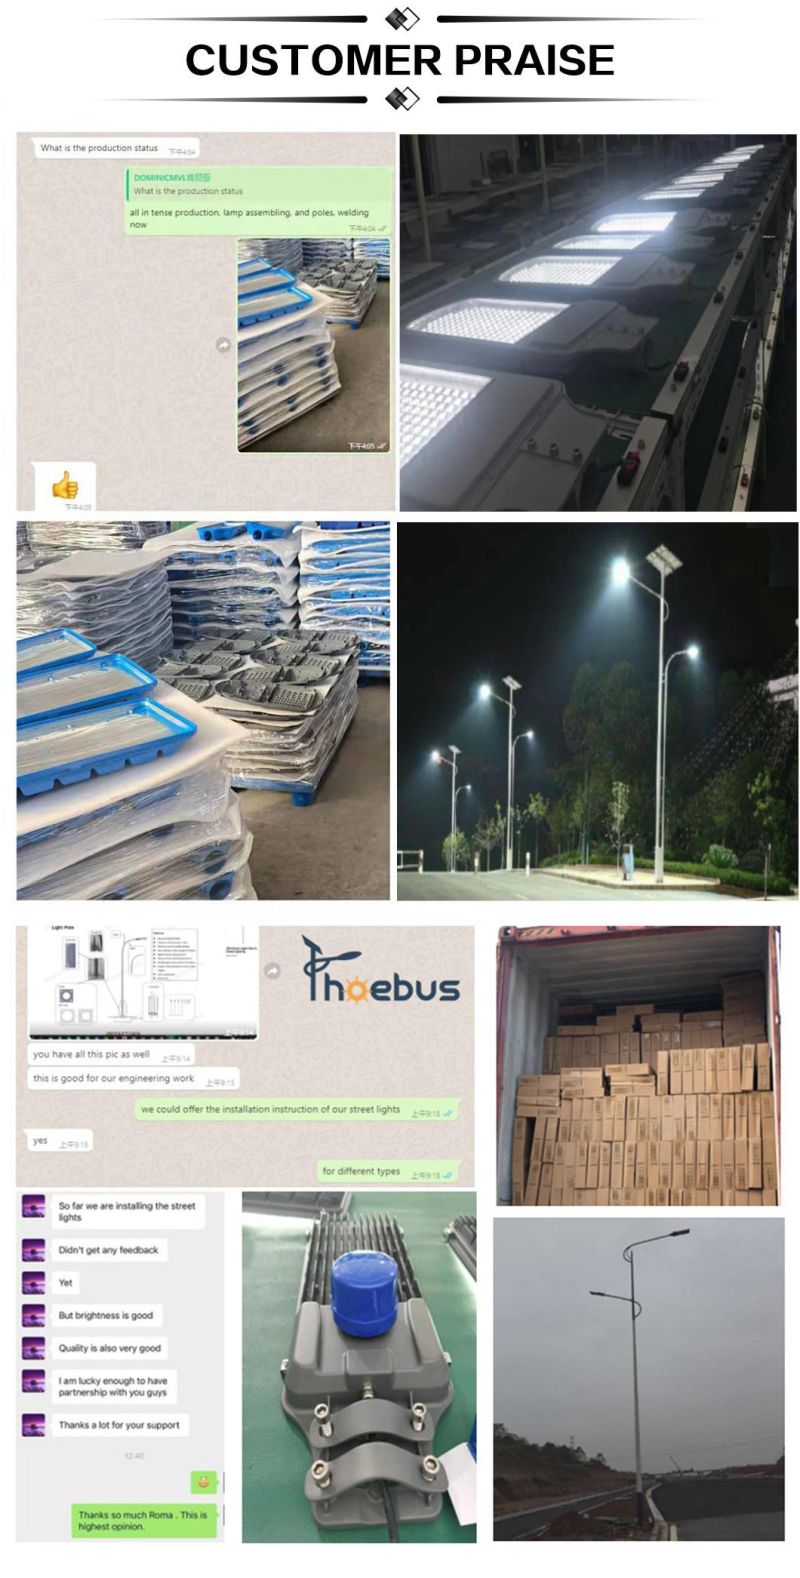 Famous Brand Chip Ultra Bright LED Lamp Outdoor Economic LED Light 100W